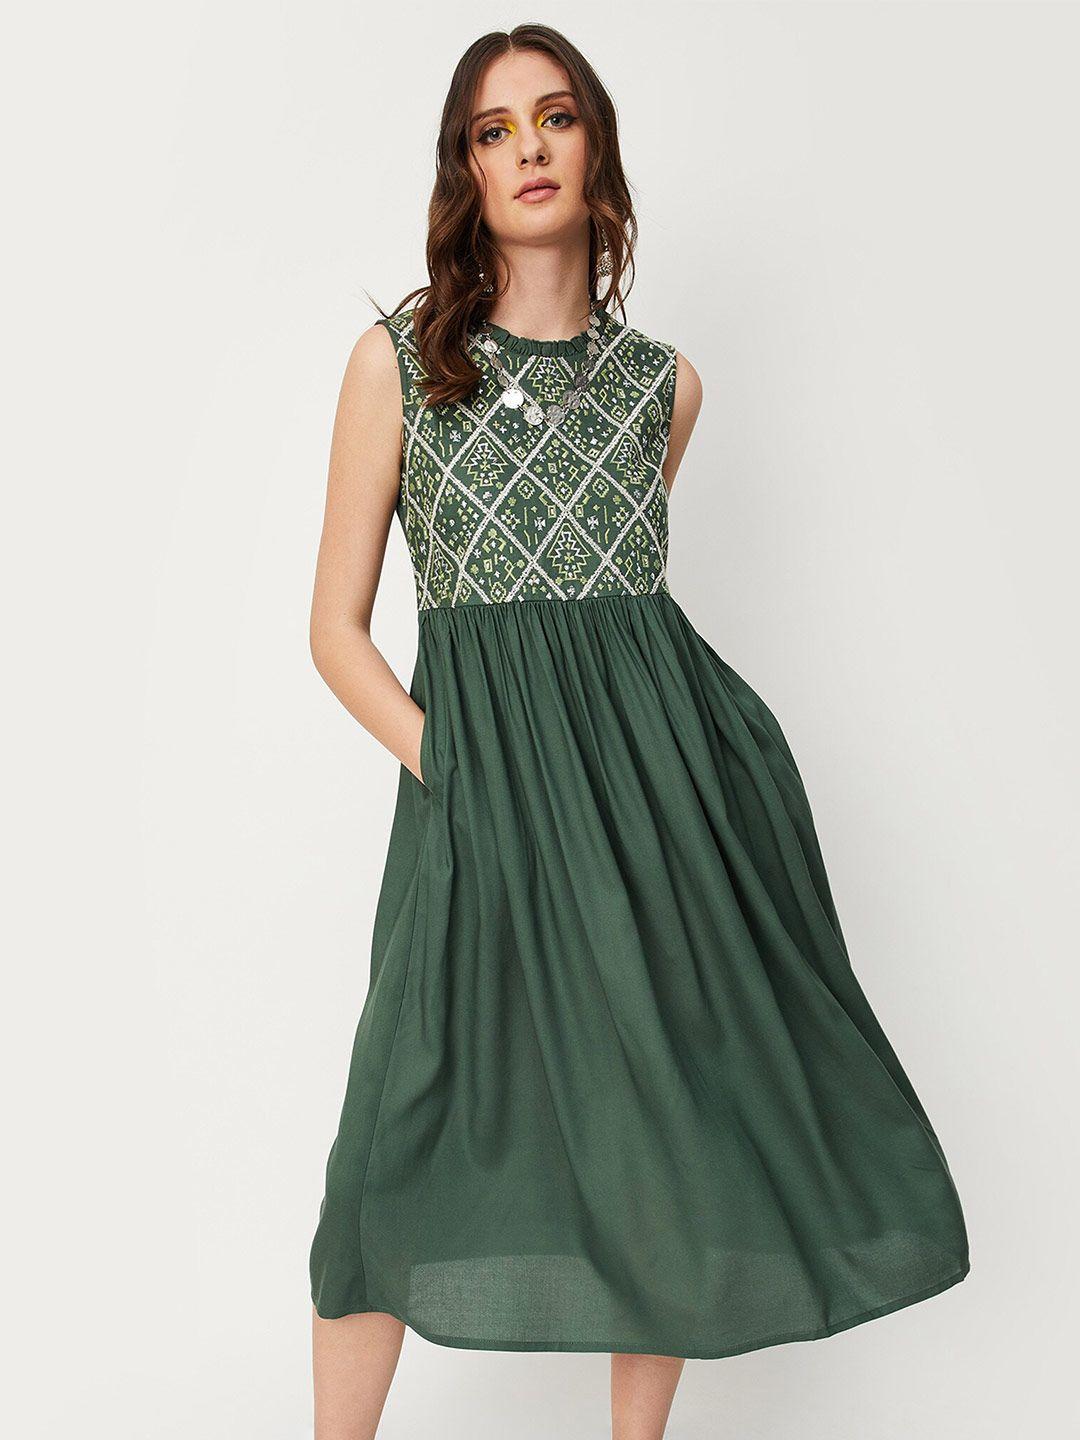 max sleeveless embroidered fit & flare dress